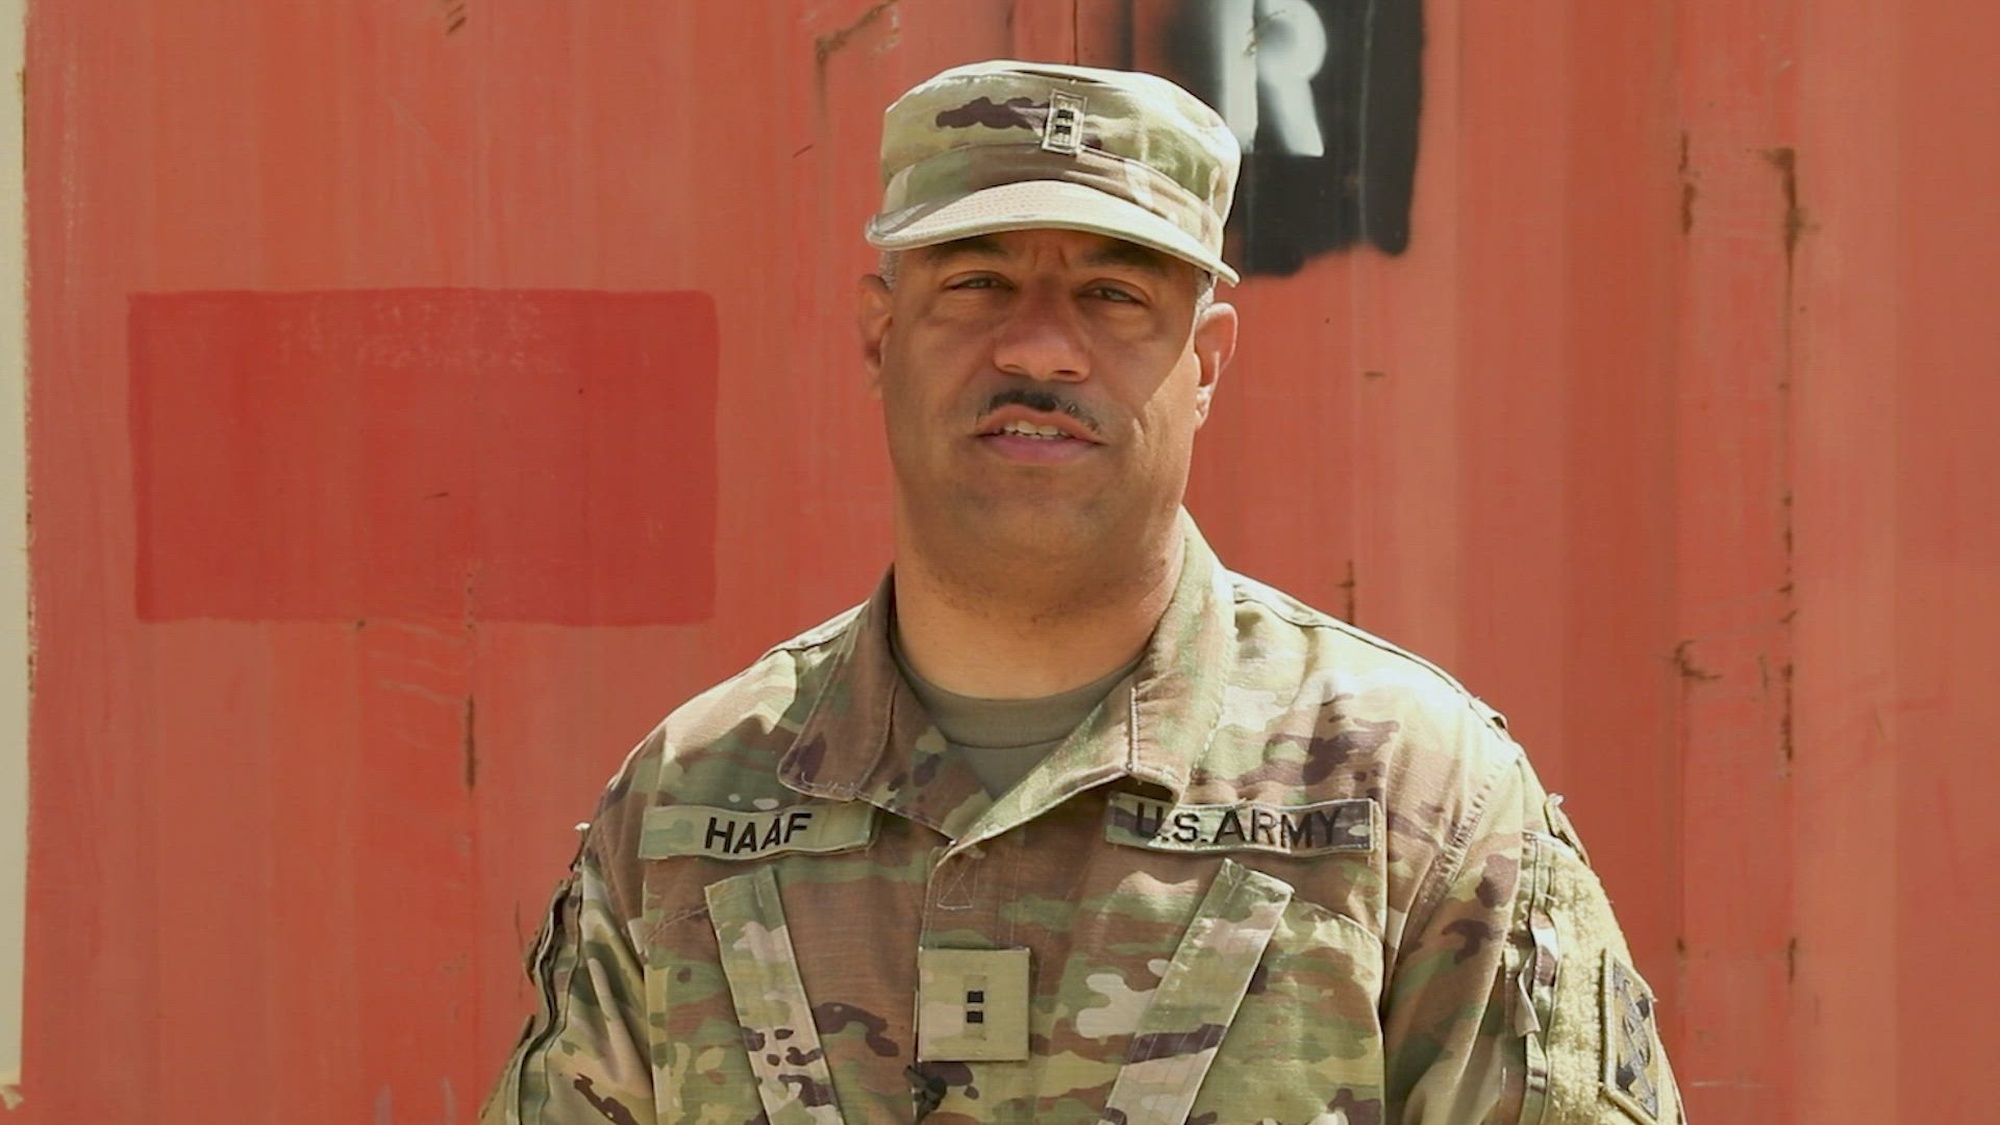 U.S. Army Reserve Chief Warrant Officer 2, Sascha Haaf, ammunition warrant officer, 143d Expeditionary Sustainment Command, wishes the U.S. Army Reserve a happy 115th birthday (U.S. Army Reserve video by Spc. Christian Cote)